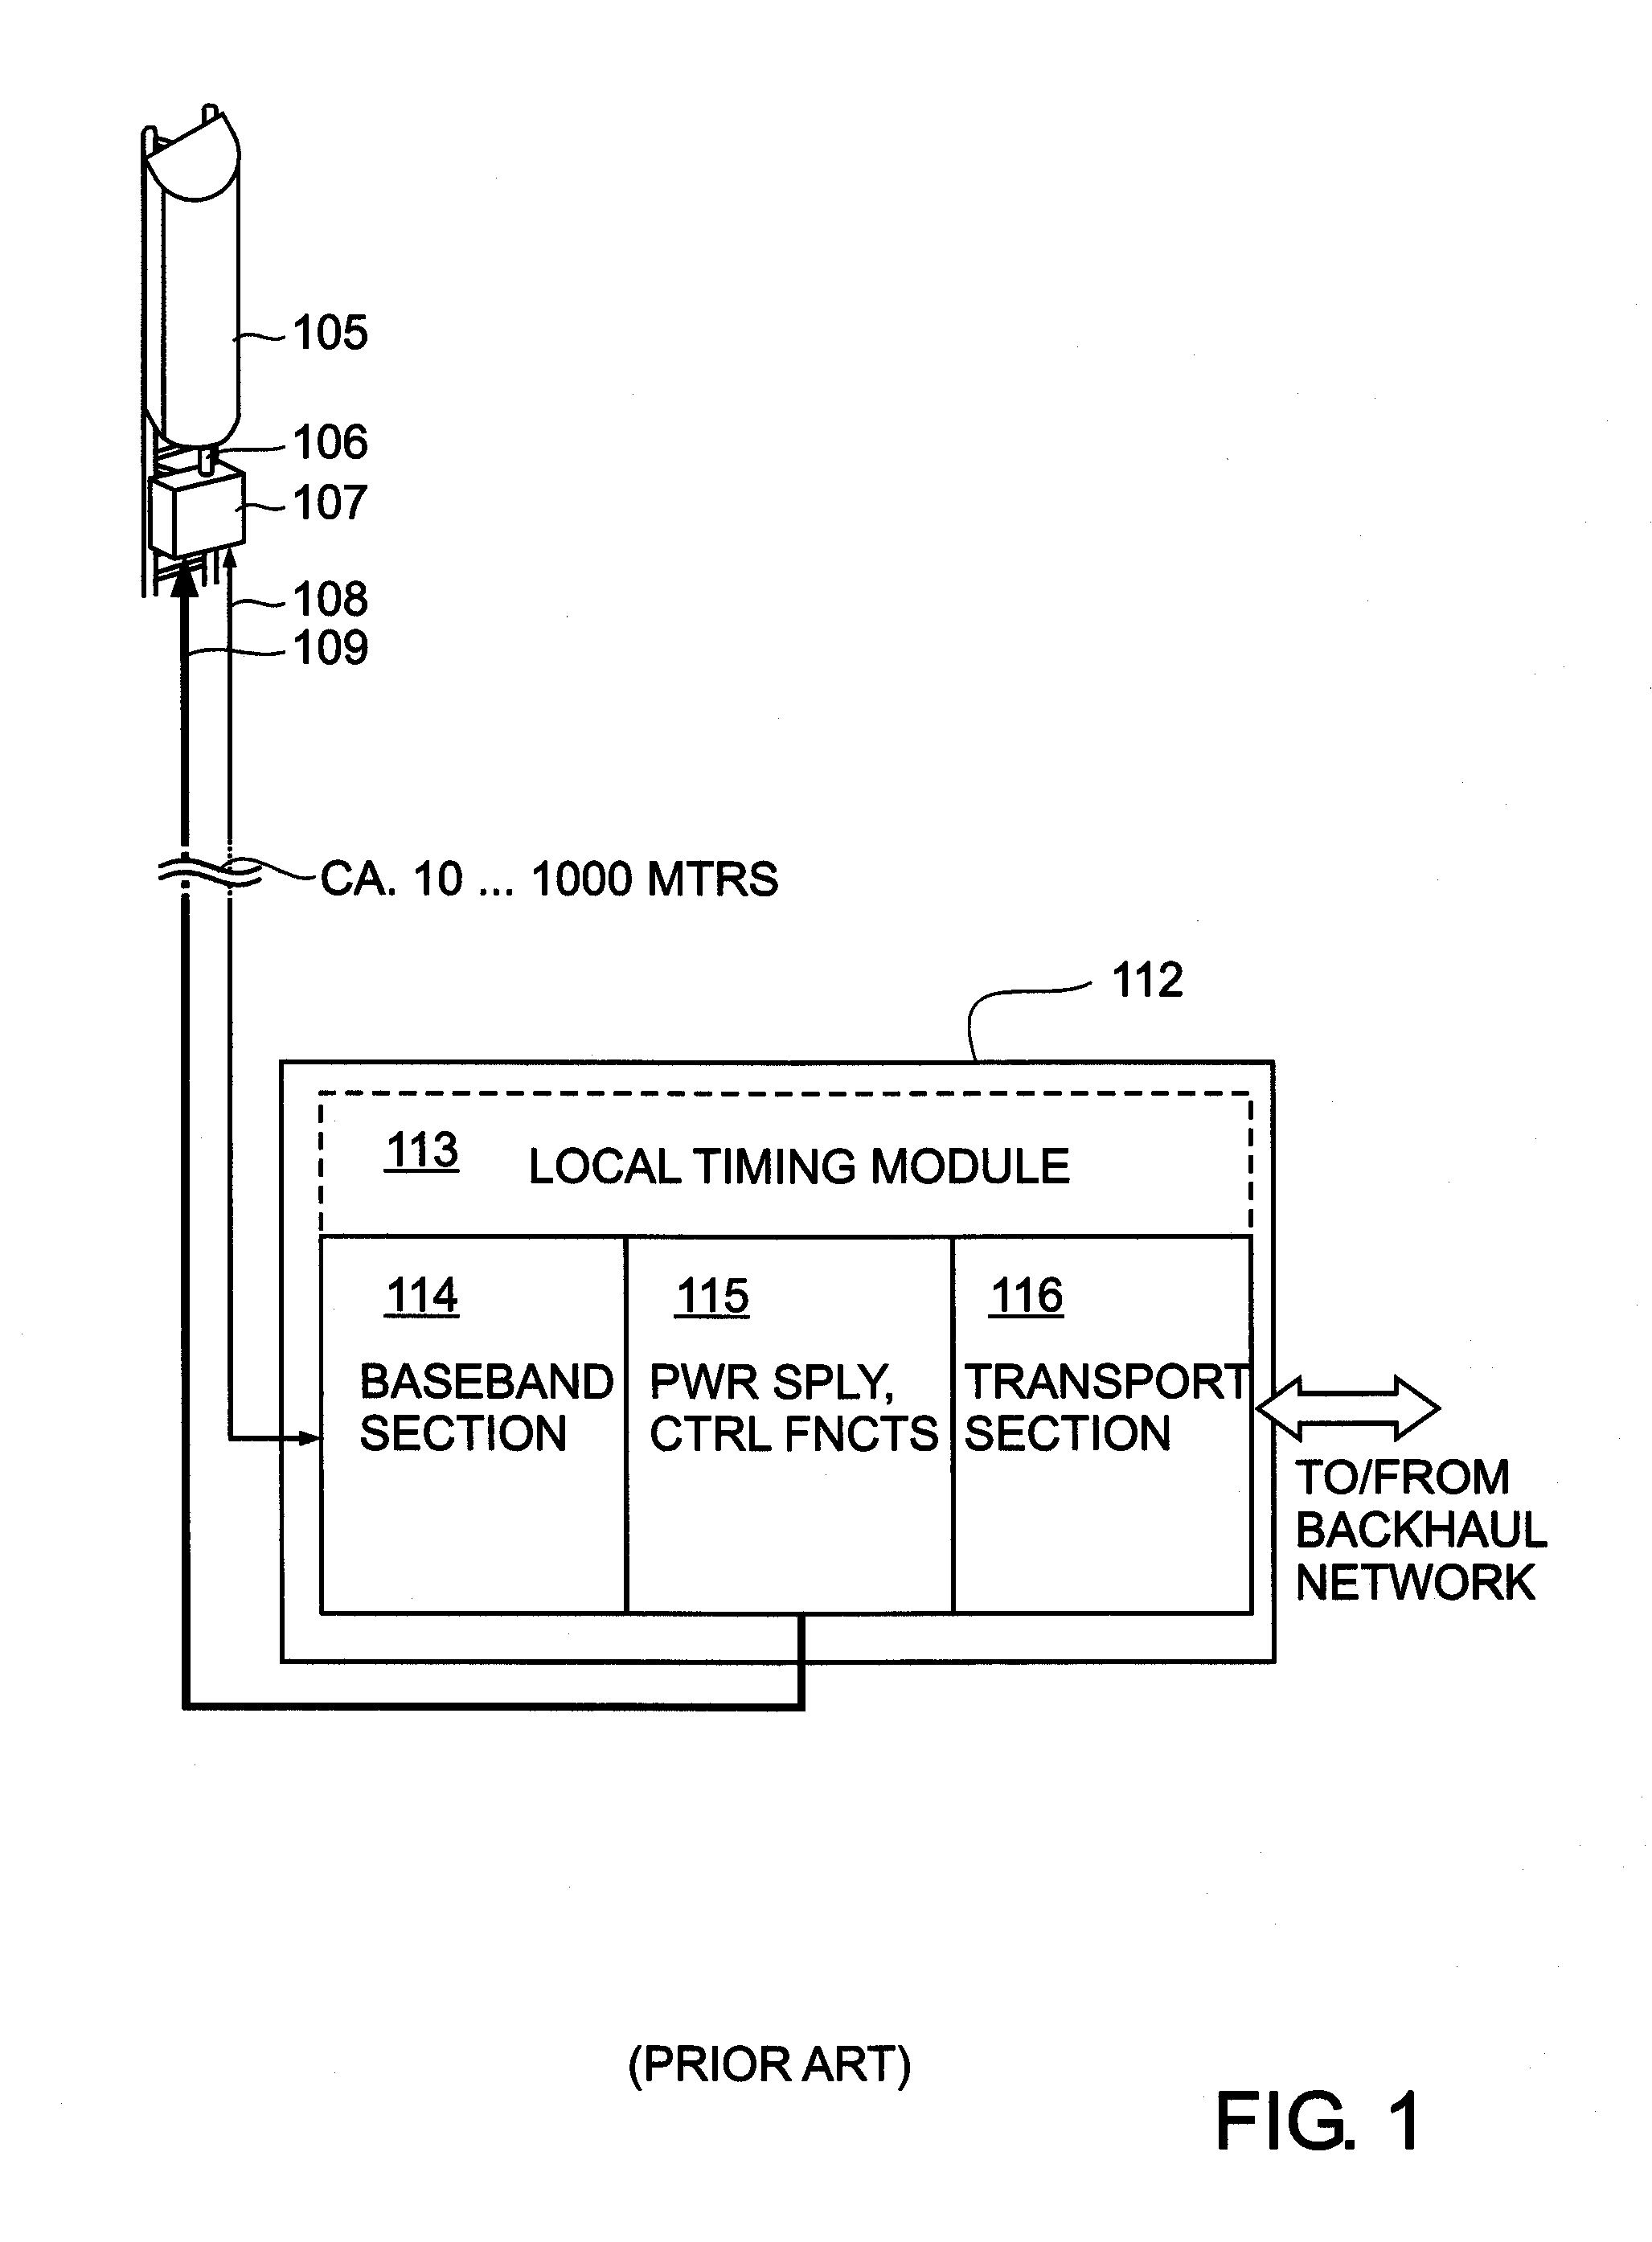 Remotely located radio transceiver for mobile communications network